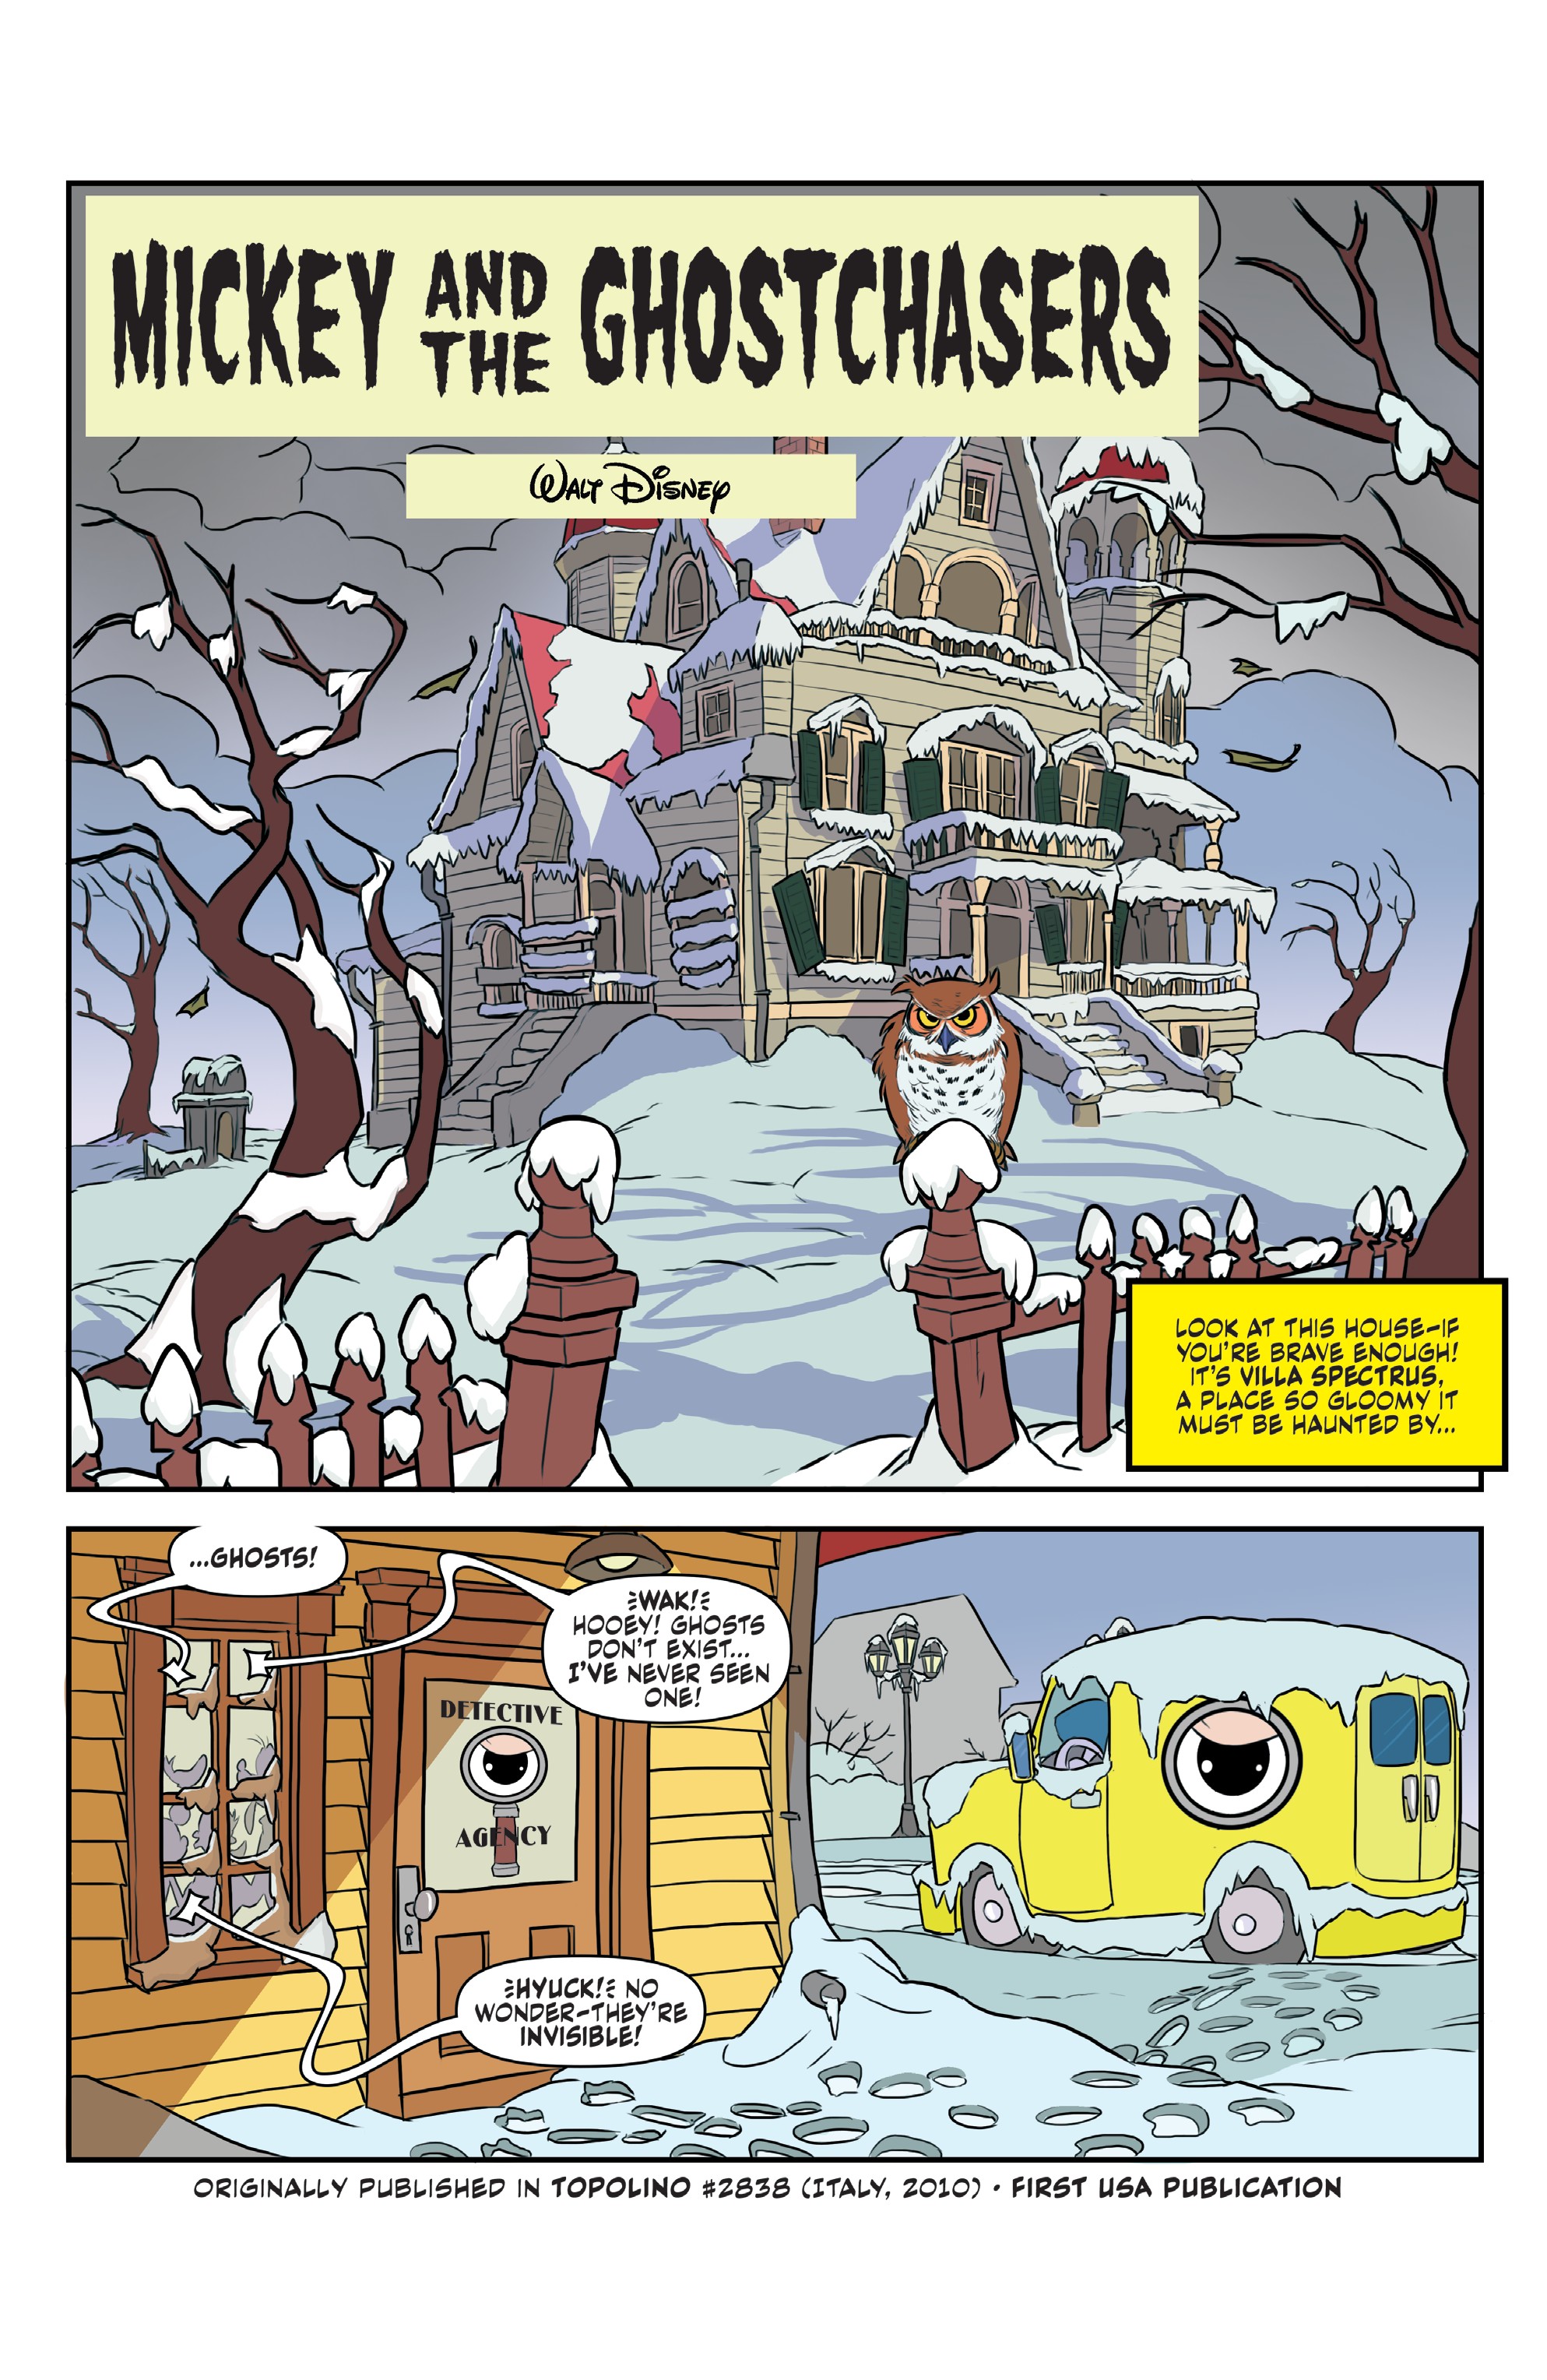 Disney Comics and Stories (2018-): Chapter 2 - Page 3